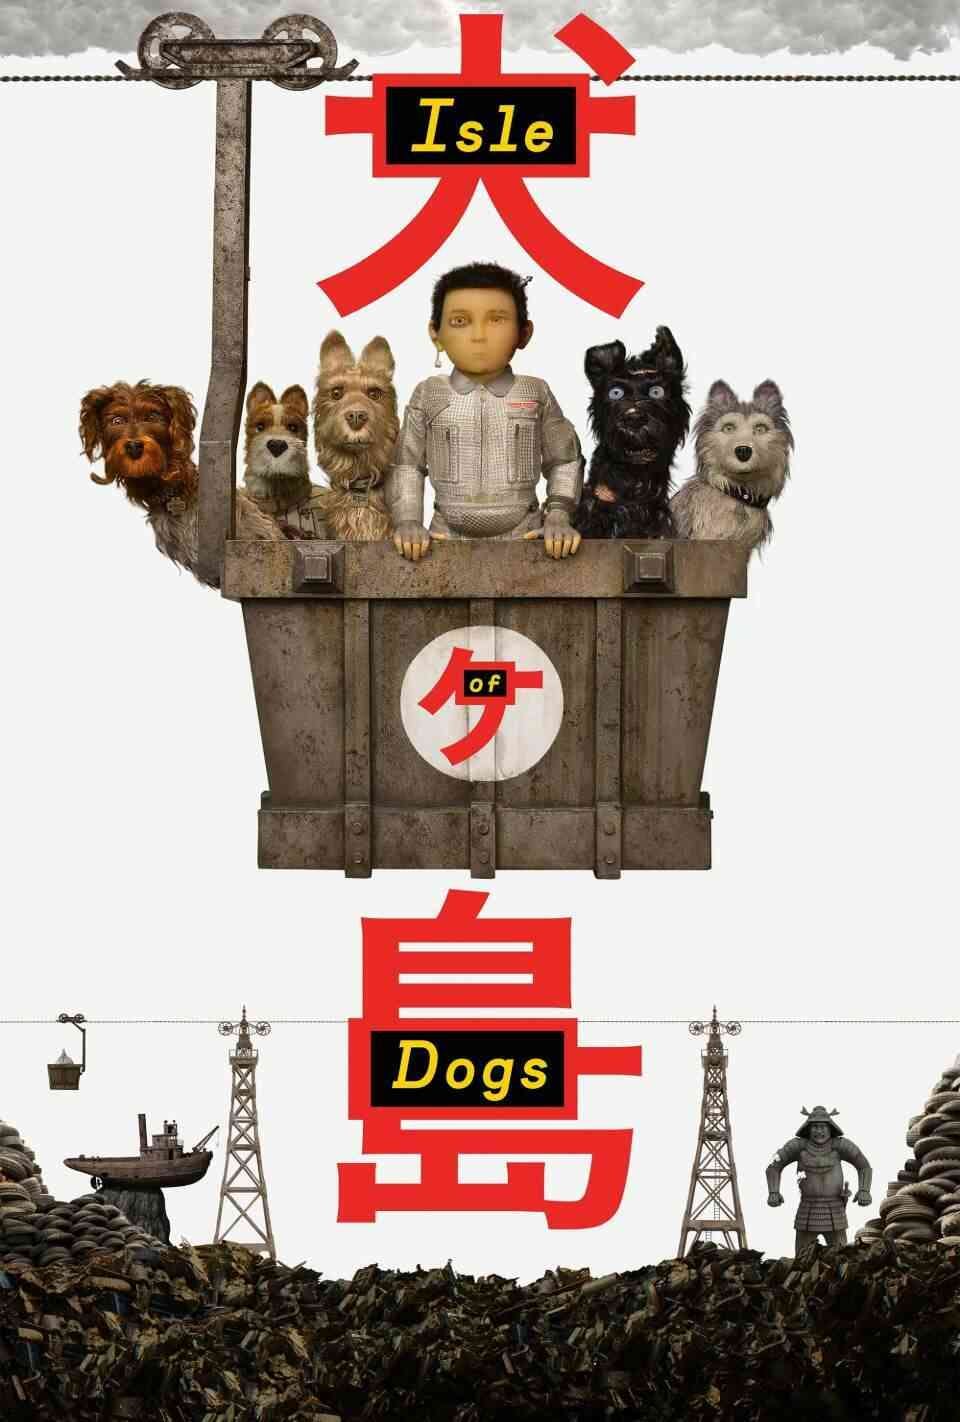 Read Isle of Dogs screenplay (poster)